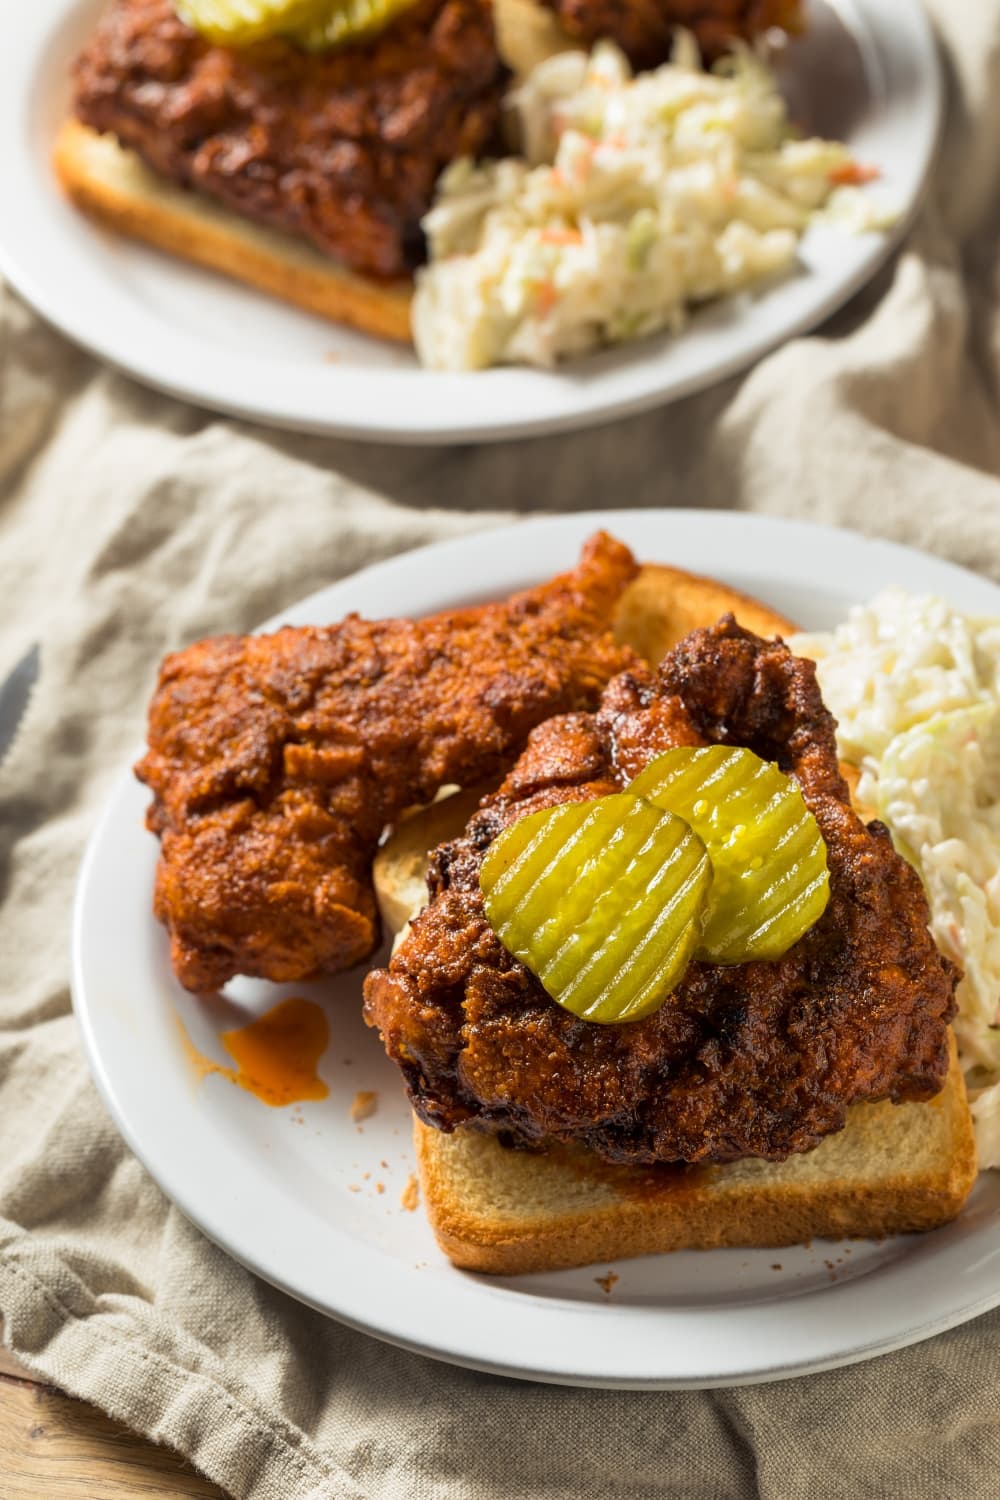 Nashville Hot Chicken Served with Pickles, Coleslaw and Bread